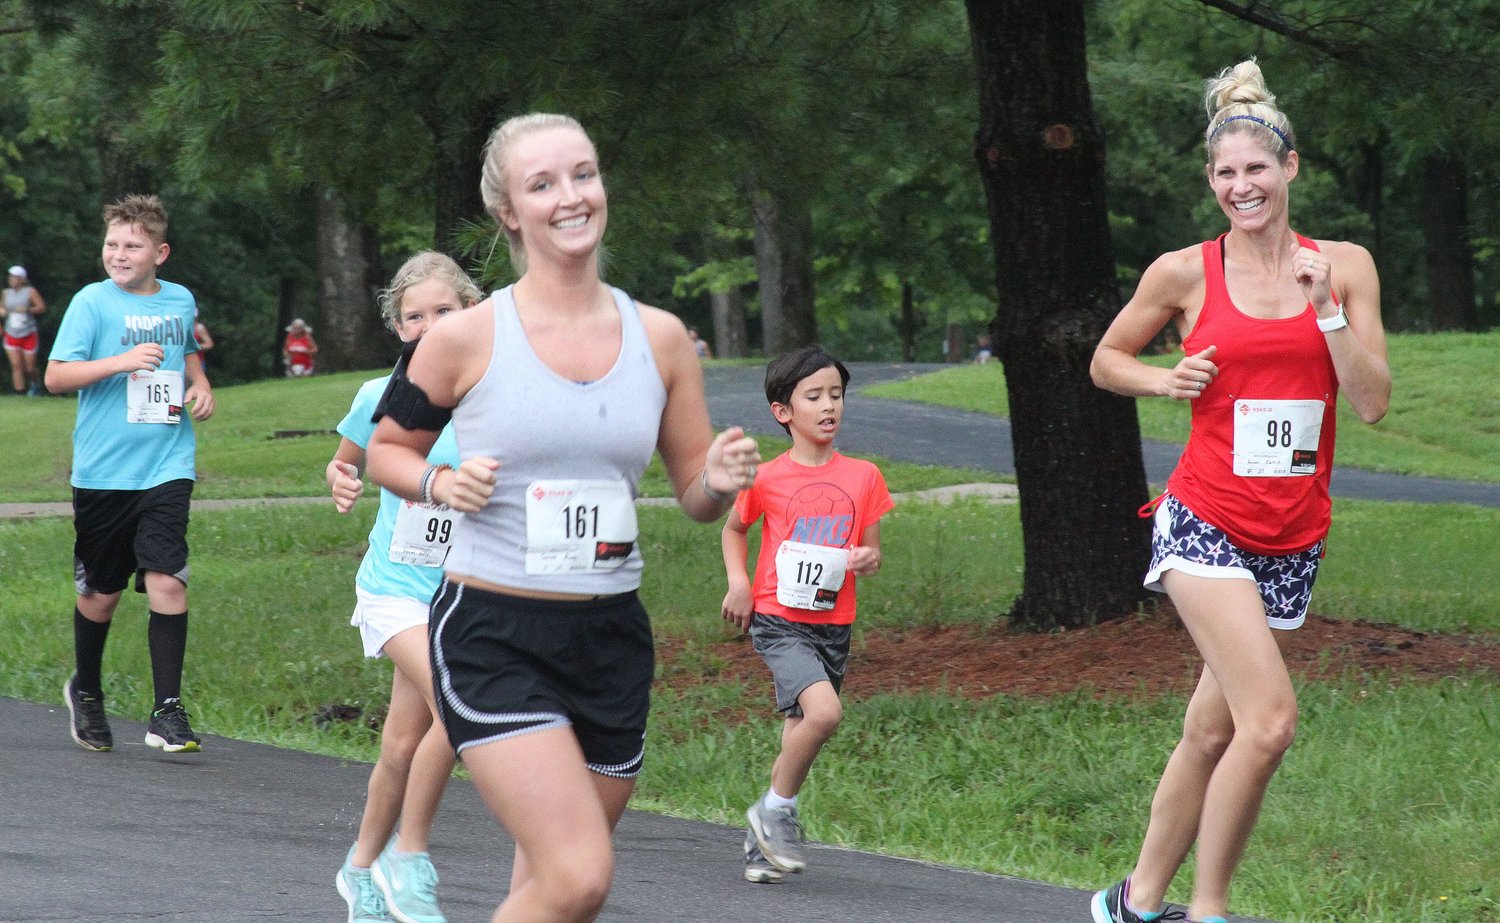 A pair of female runners join other participants of the 2019 Moberly Independence Day 5k Run/Walk fundraiser through Rothwell Park  for the high school's cross country program.The Sunday morning July 4 event will be the 29th time this 5k has taken place as the COVID-pandemic forced last year's event to cancel.